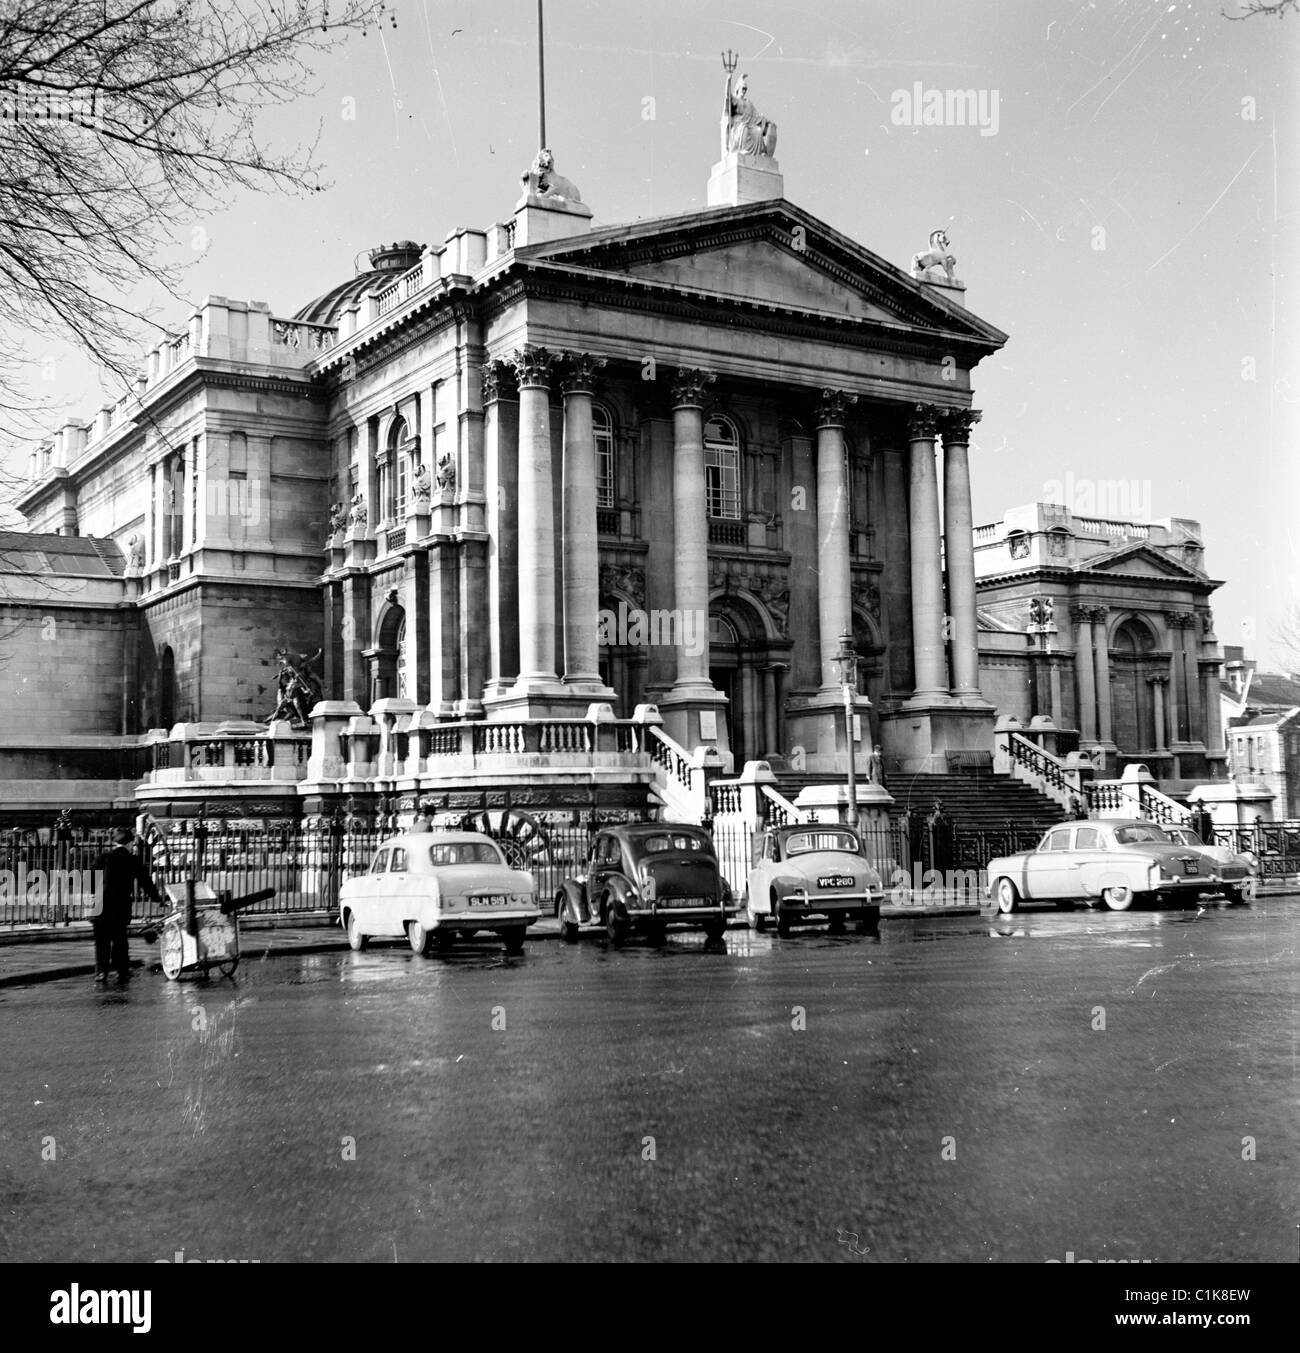 1950s, cars of the era parked outside the Tate Gallery at Millbank in Westminster, London. Opened in 1897 the Tate houses collections of British Art. Stock Photo